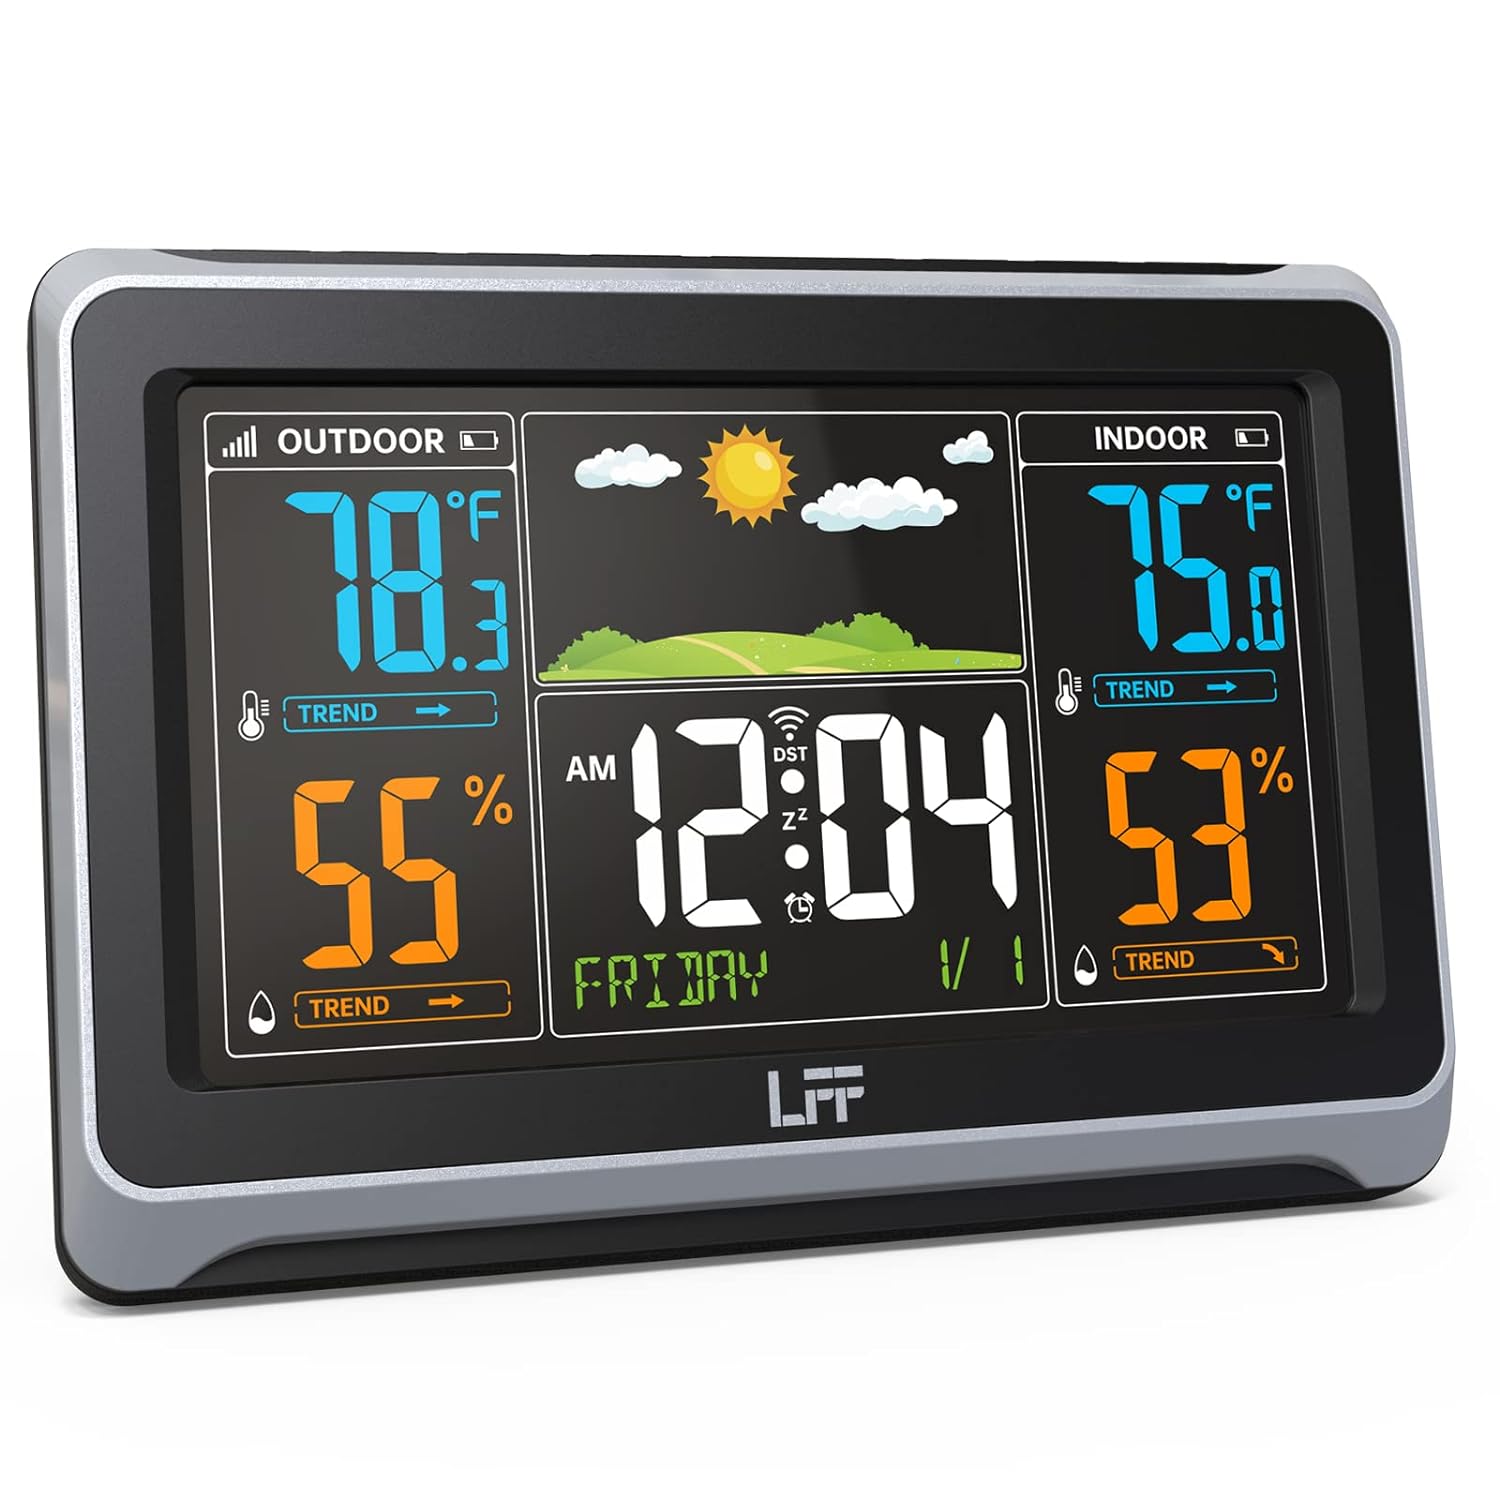 Review of LFF Weather Station Indoor Outdoor Thermometer Wireless, Color Display Digital Weather Thermometer with Atomic Clock, Weather Forecast Station with Backlight